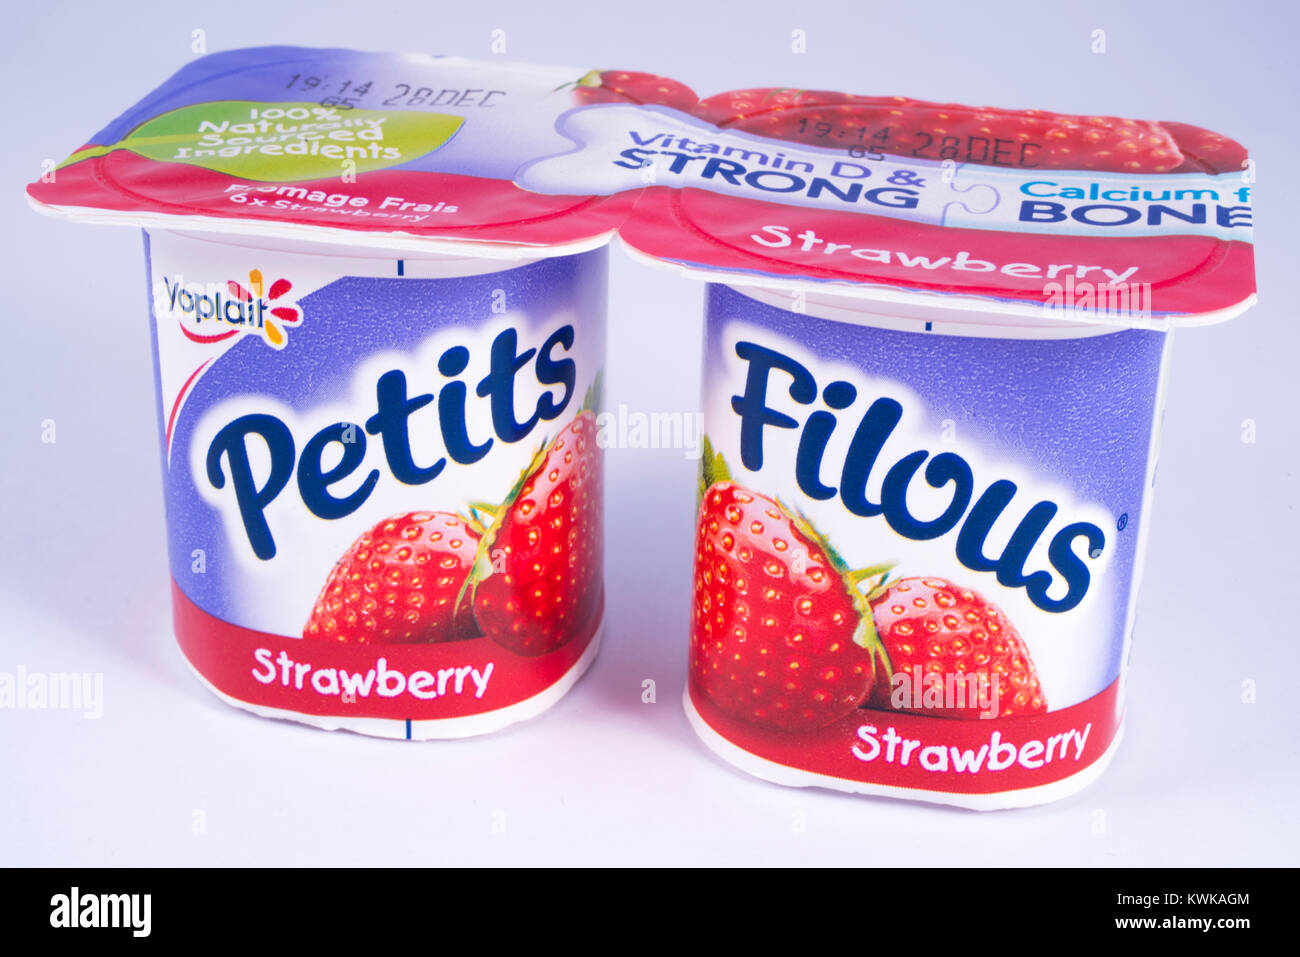 LONDON, UK - DECEMBER 18TH 2017: A close-up of two cartons of Petits Filous yoghurts, on 18th December 2017.  Petits filous are manufactured by the Yo Stock Photo